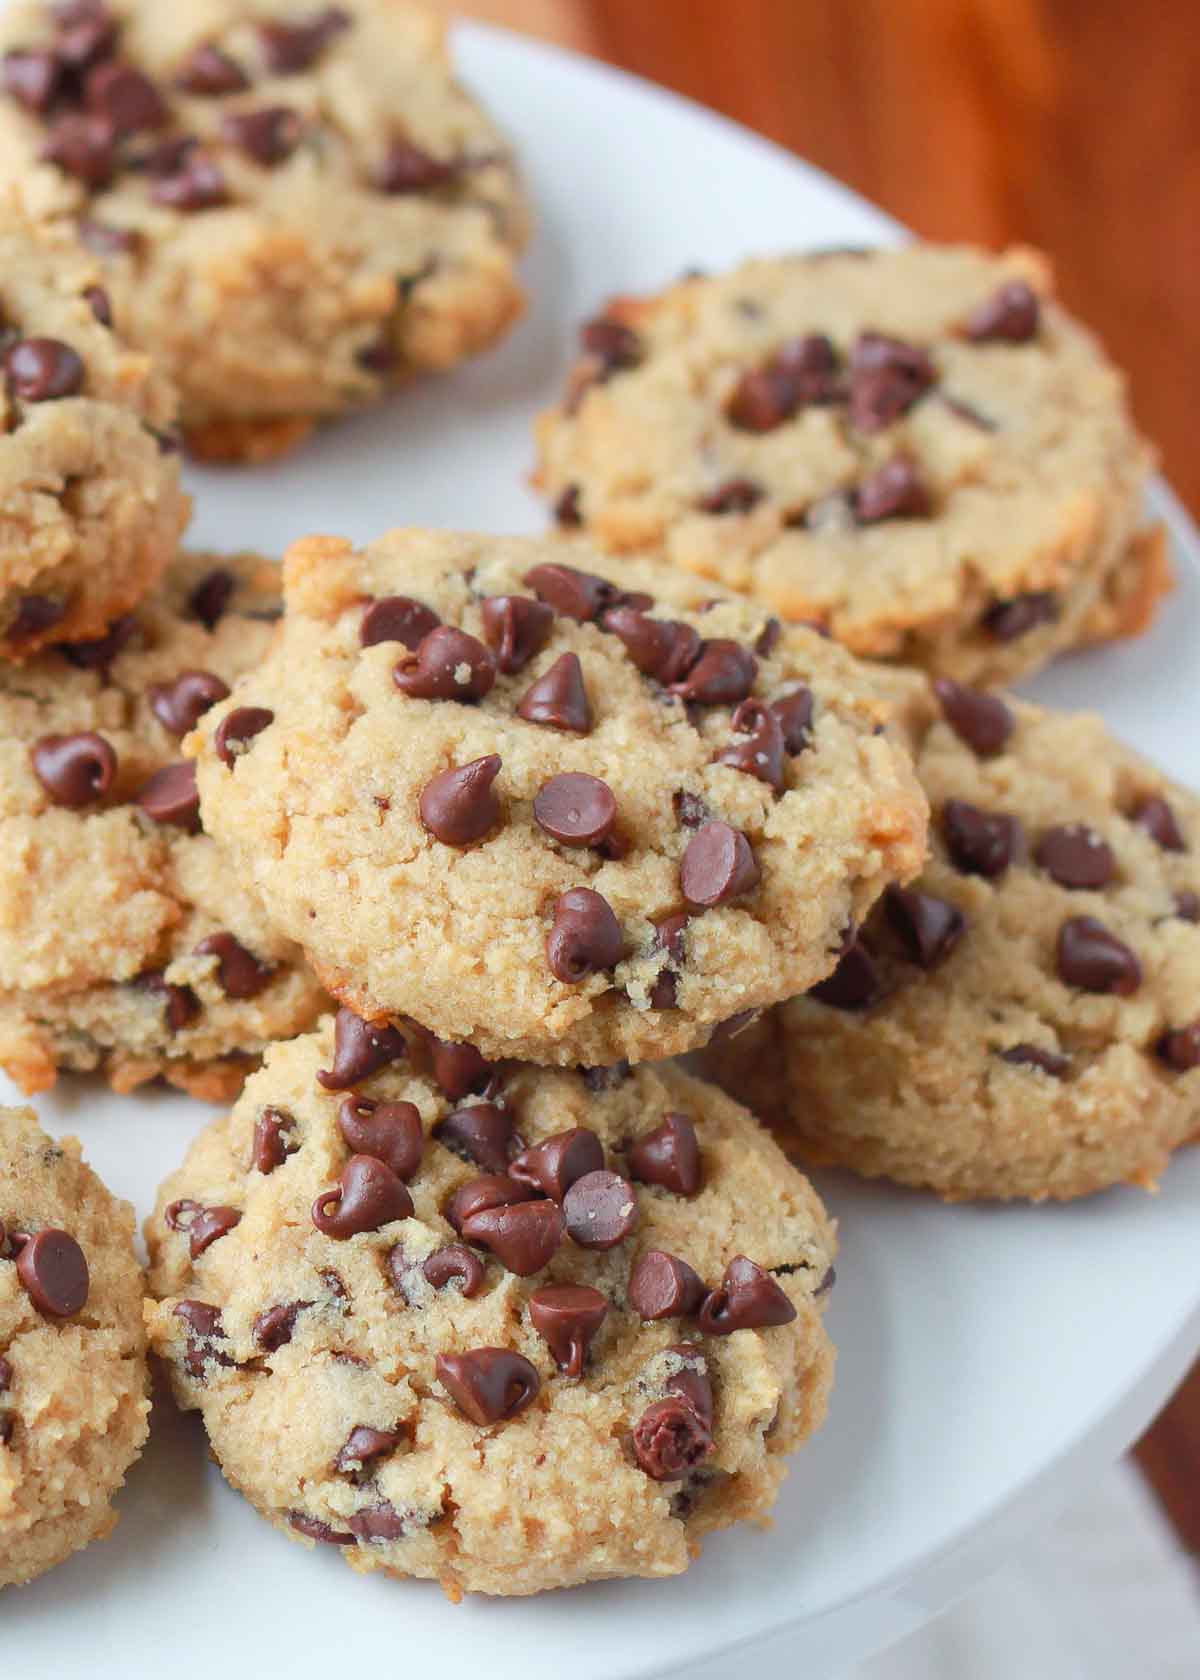 A plate full of Soft-Baked Almond Flour Chocolate Chip Cookies